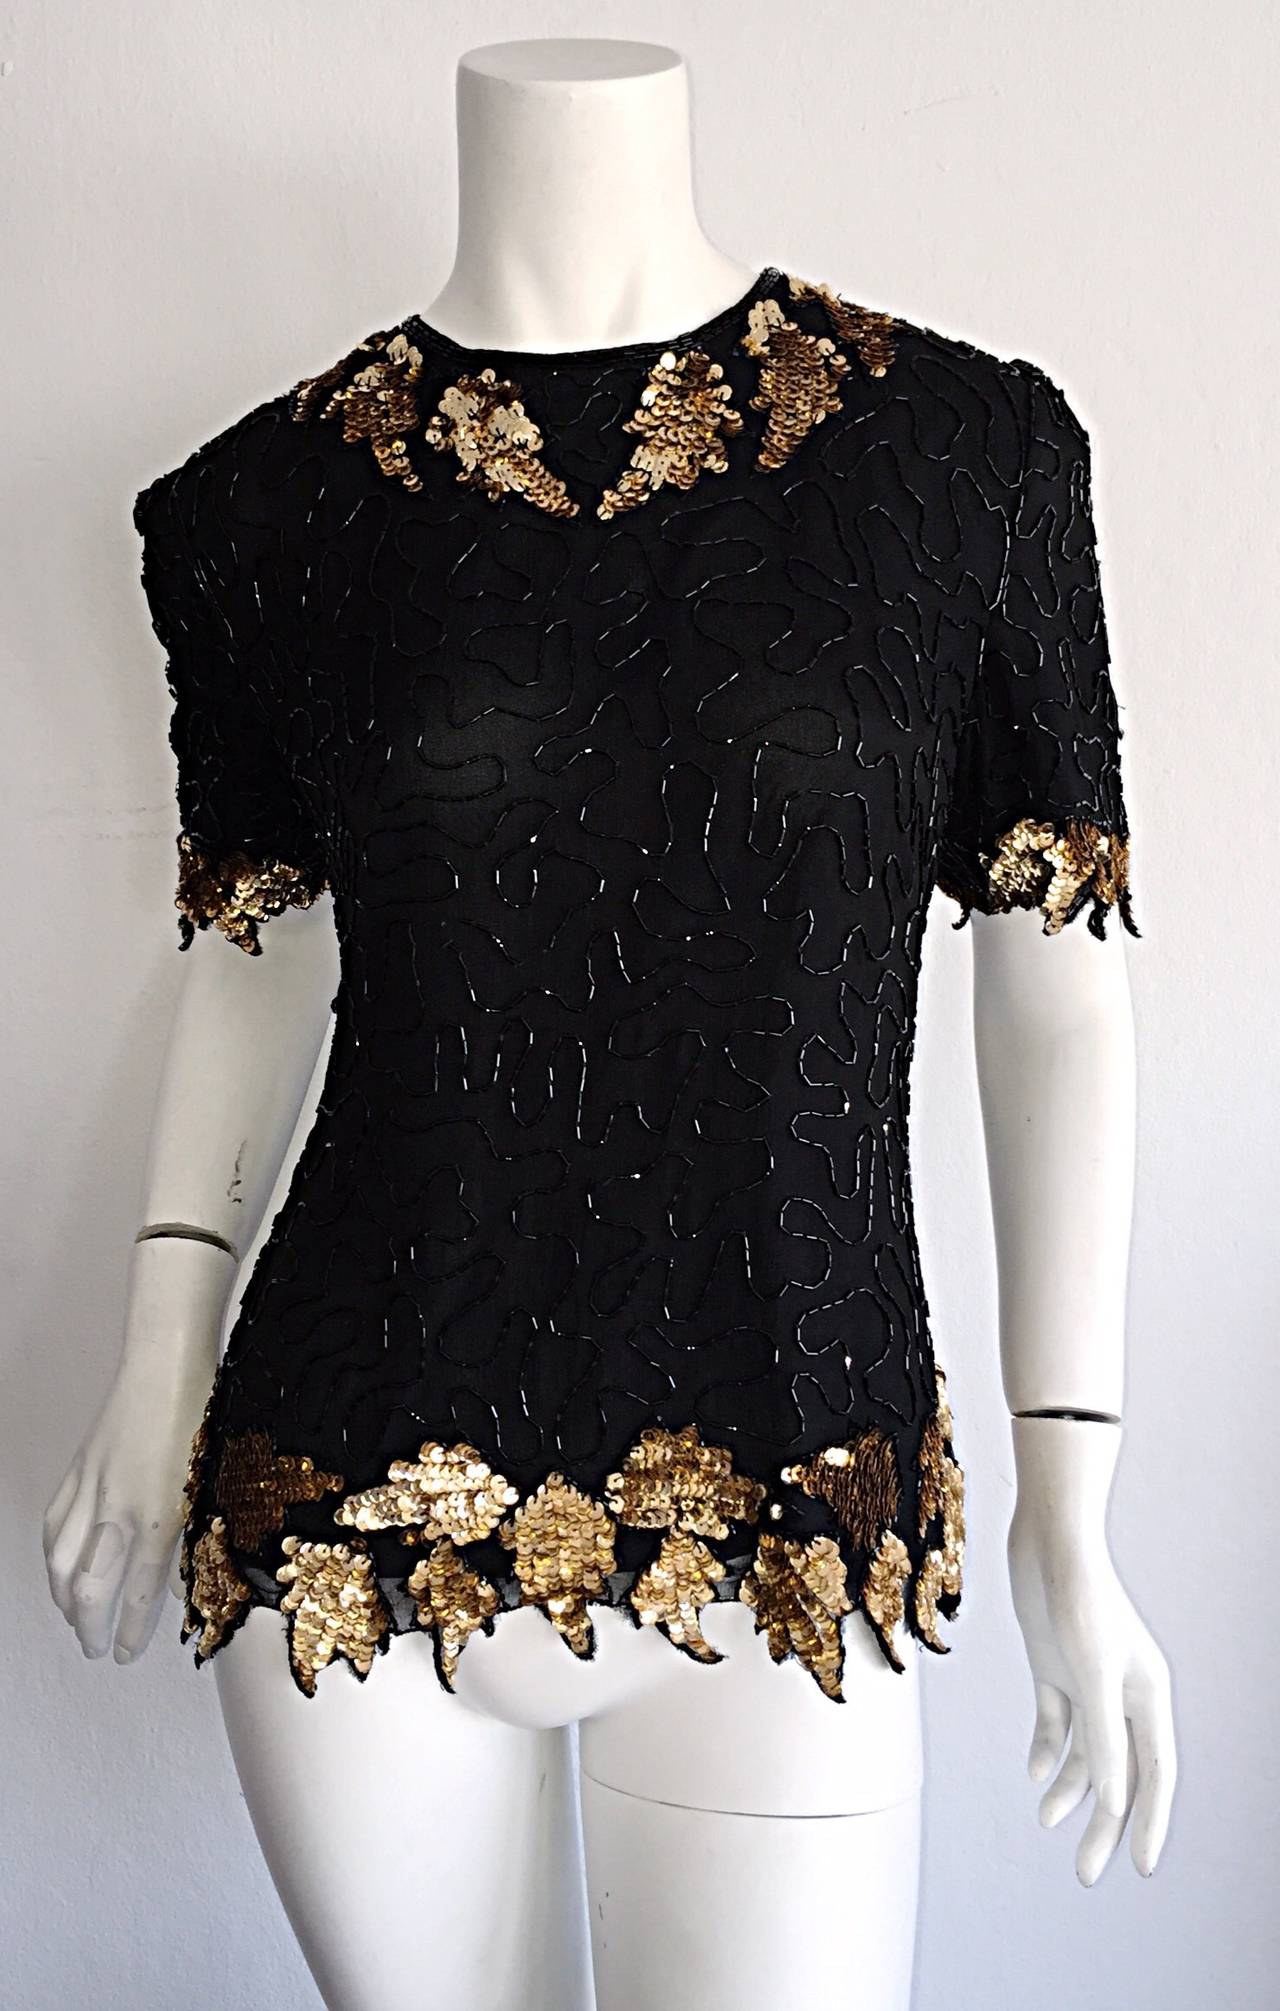 Beautiful vintage black silk beaded top! Encrusted with dozens and dozens of beads and sequins! Scalloped edges, with leaf motifs. Keyhole back. Can easily be dressed up or down. Looks great with jeans, or a skirt. In great condition. Marked Size